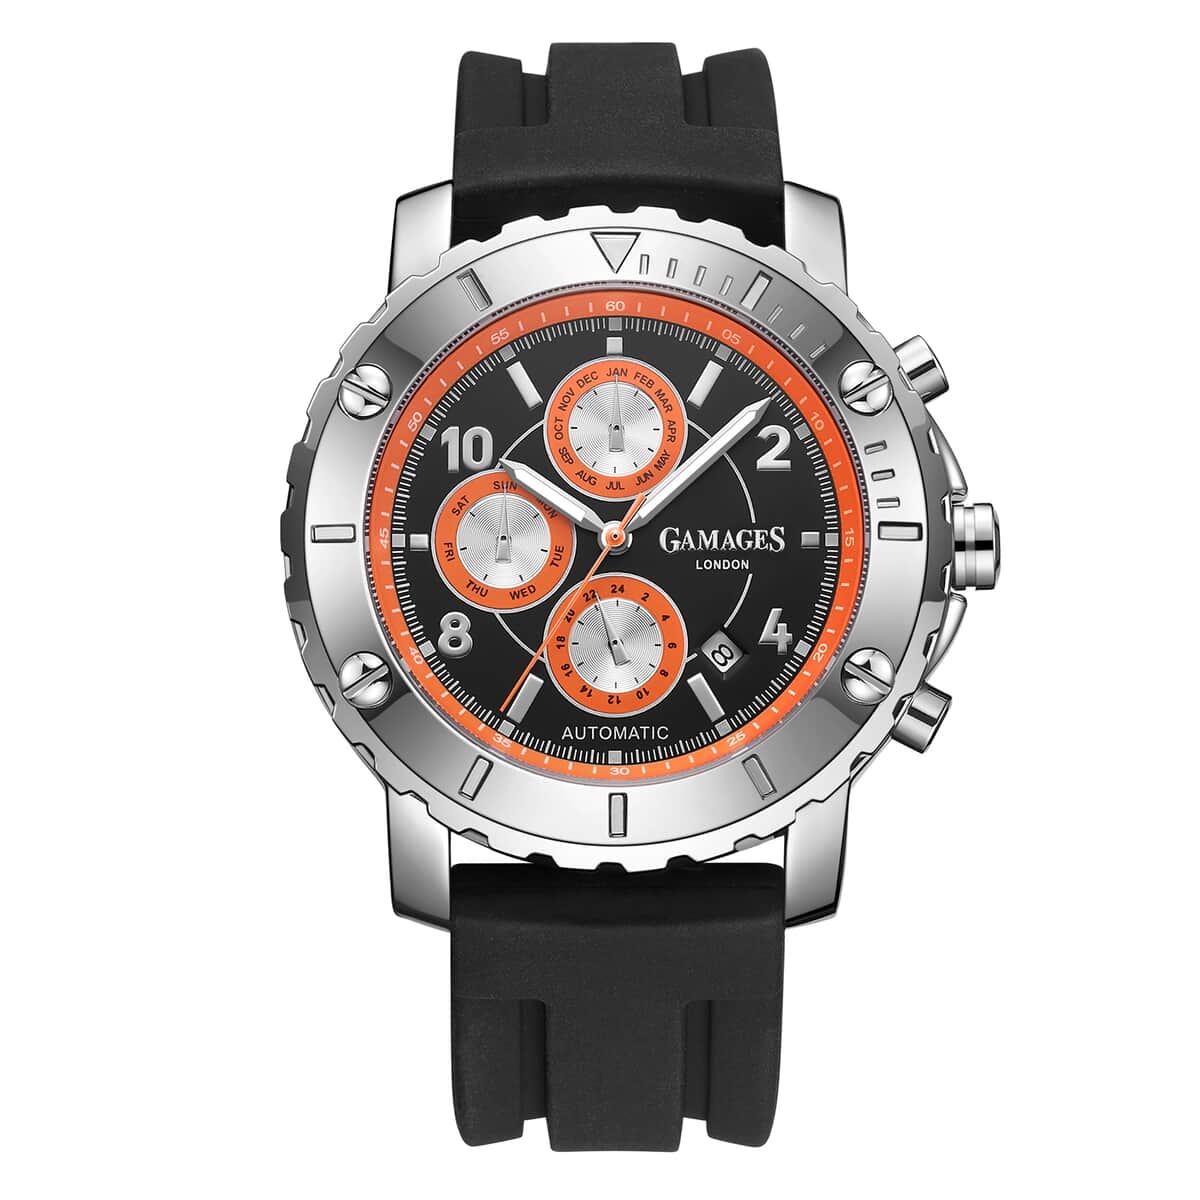 GAMAGES OF LONDON Limited Edition Hand Assembled Innovator Automatic Movement Silicone Strap Watch in Orange (45mm) FREE GIFT PEN image number 0